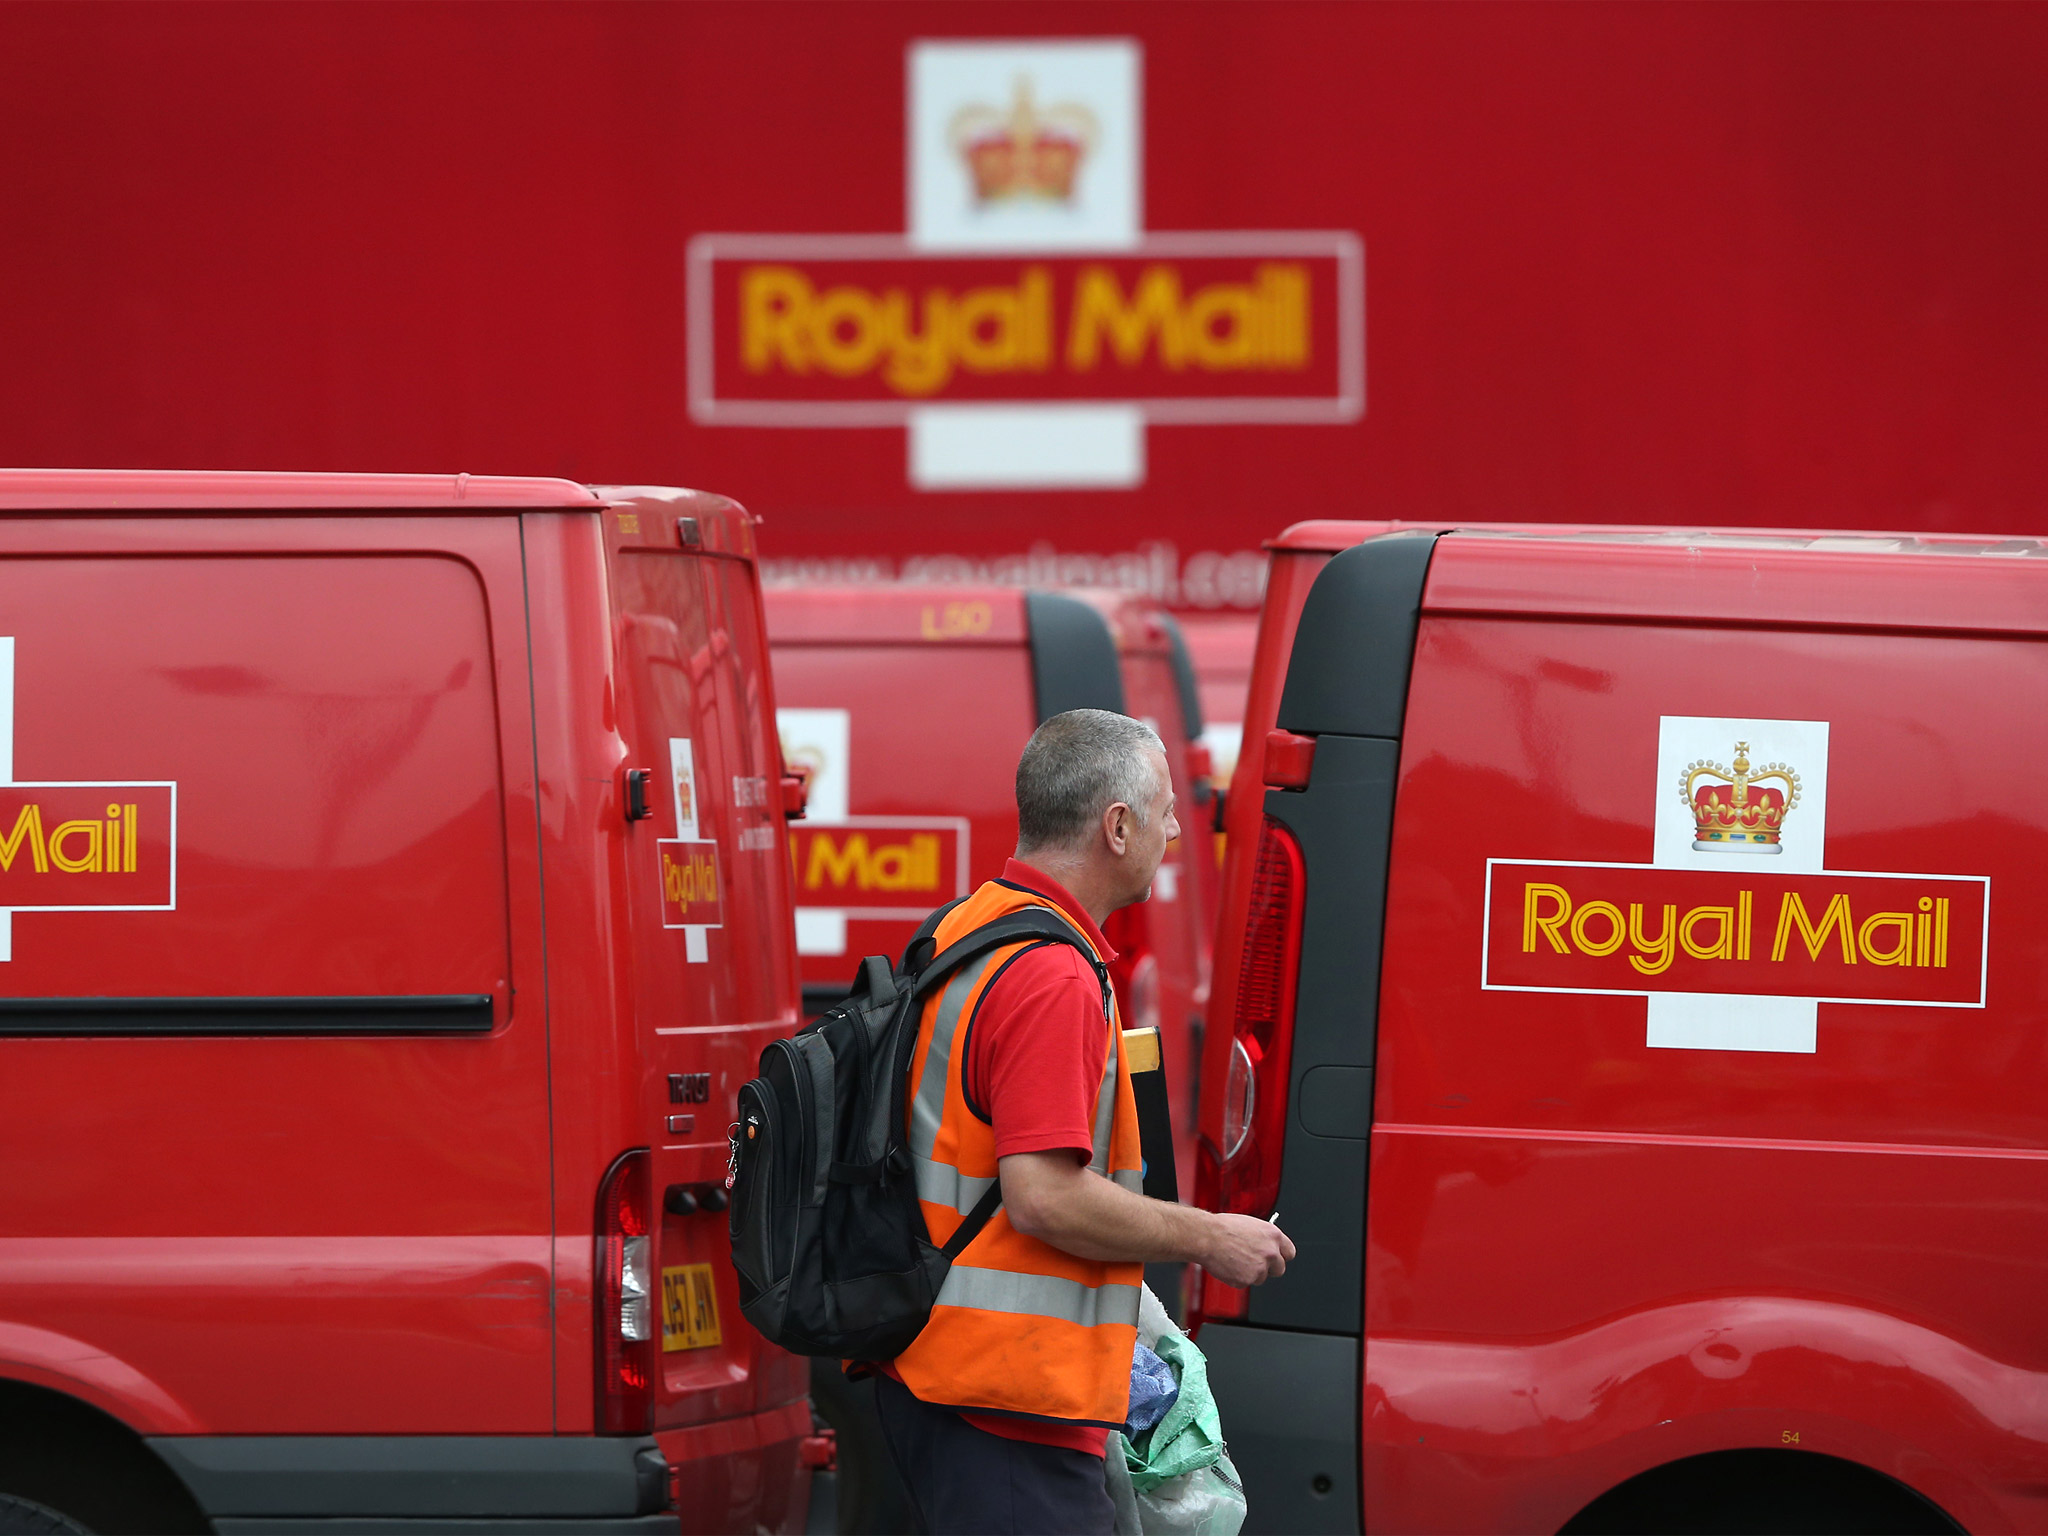 Business Secretary Vince Cable defended his decision not to raise the float price of Royal Mail before a parliamentary committee.